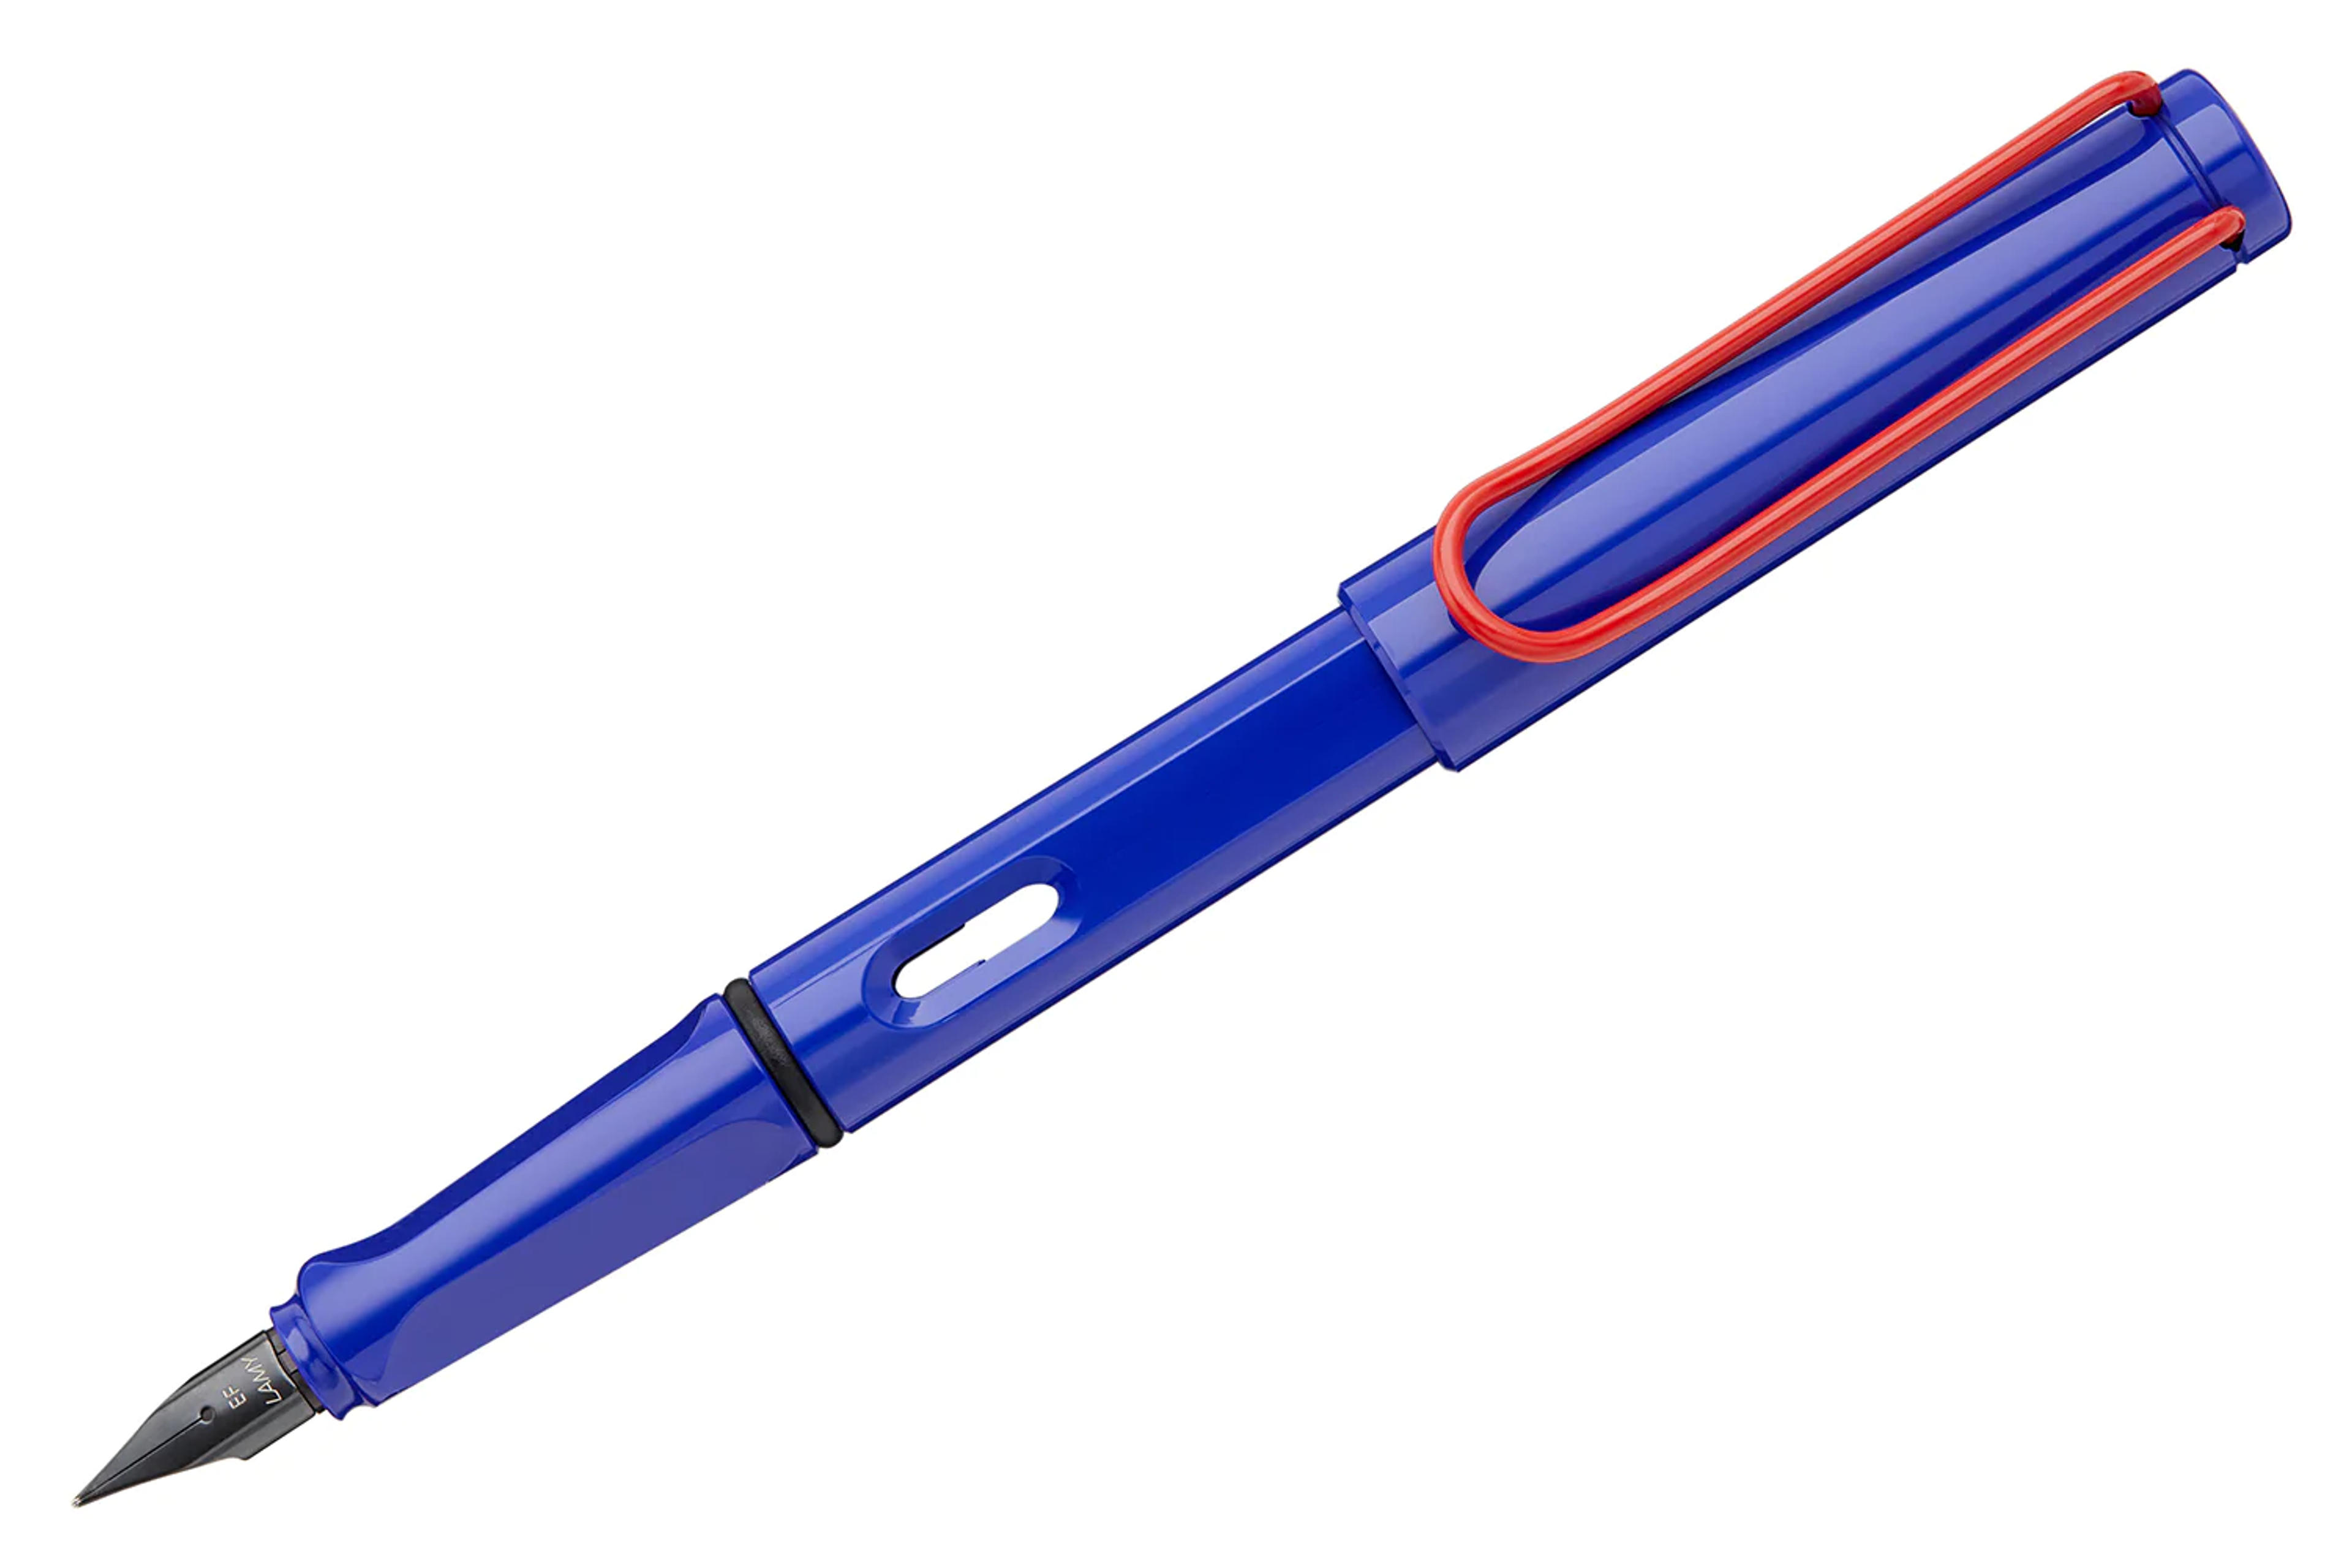 LAMY safari fountain pen - blue/red (limited production) - The Goulet Pen Company